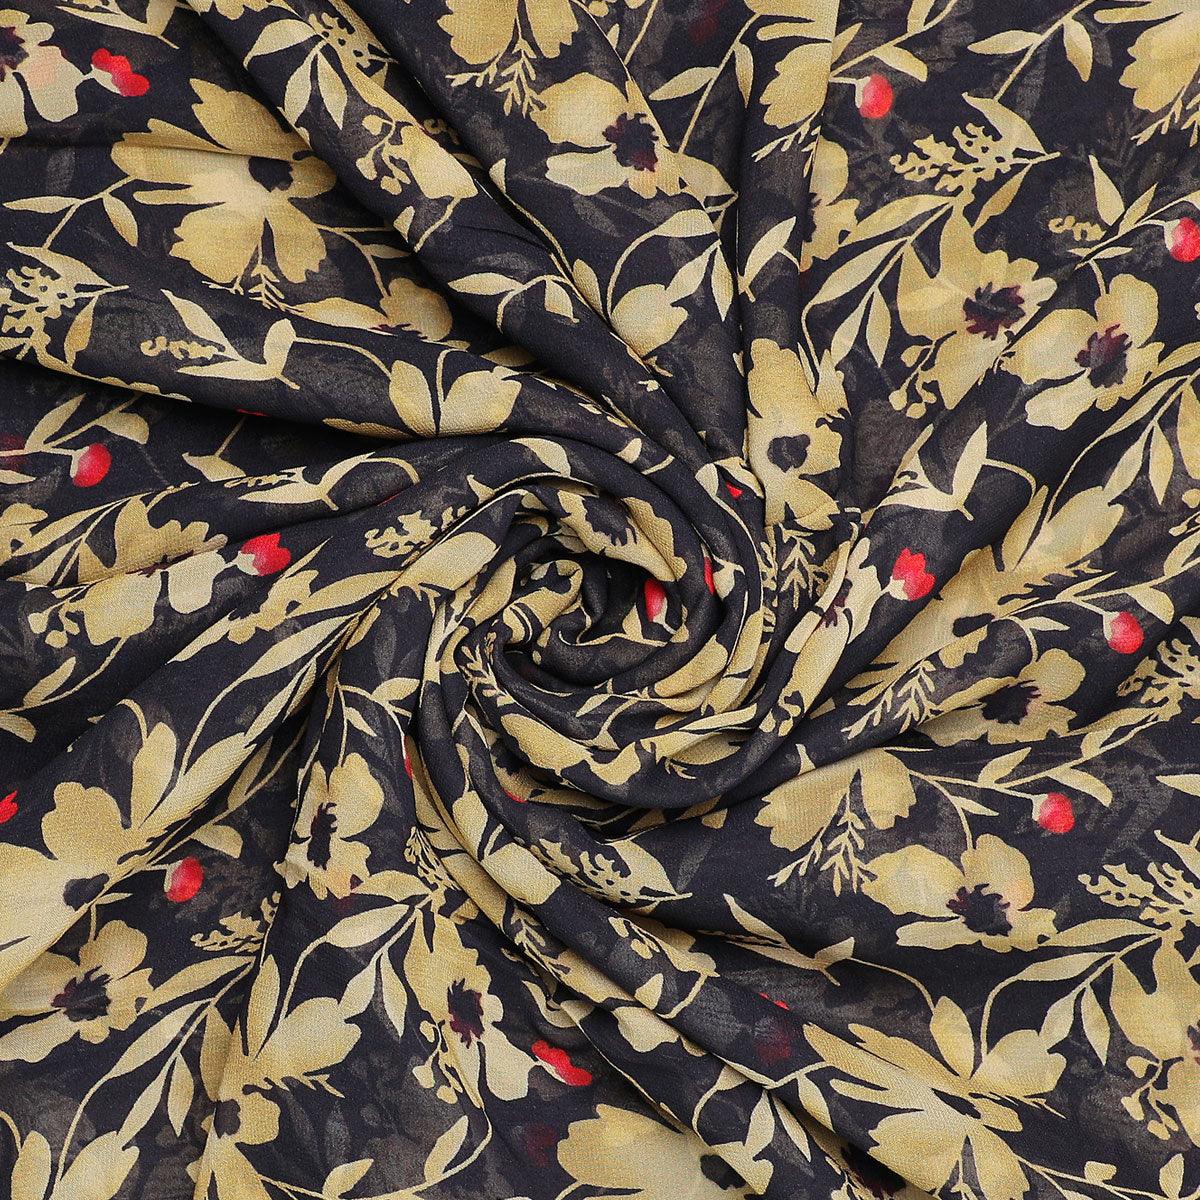 Green Leaves Printed Pure Georgette Fabric - FAB VOGUE Studio®